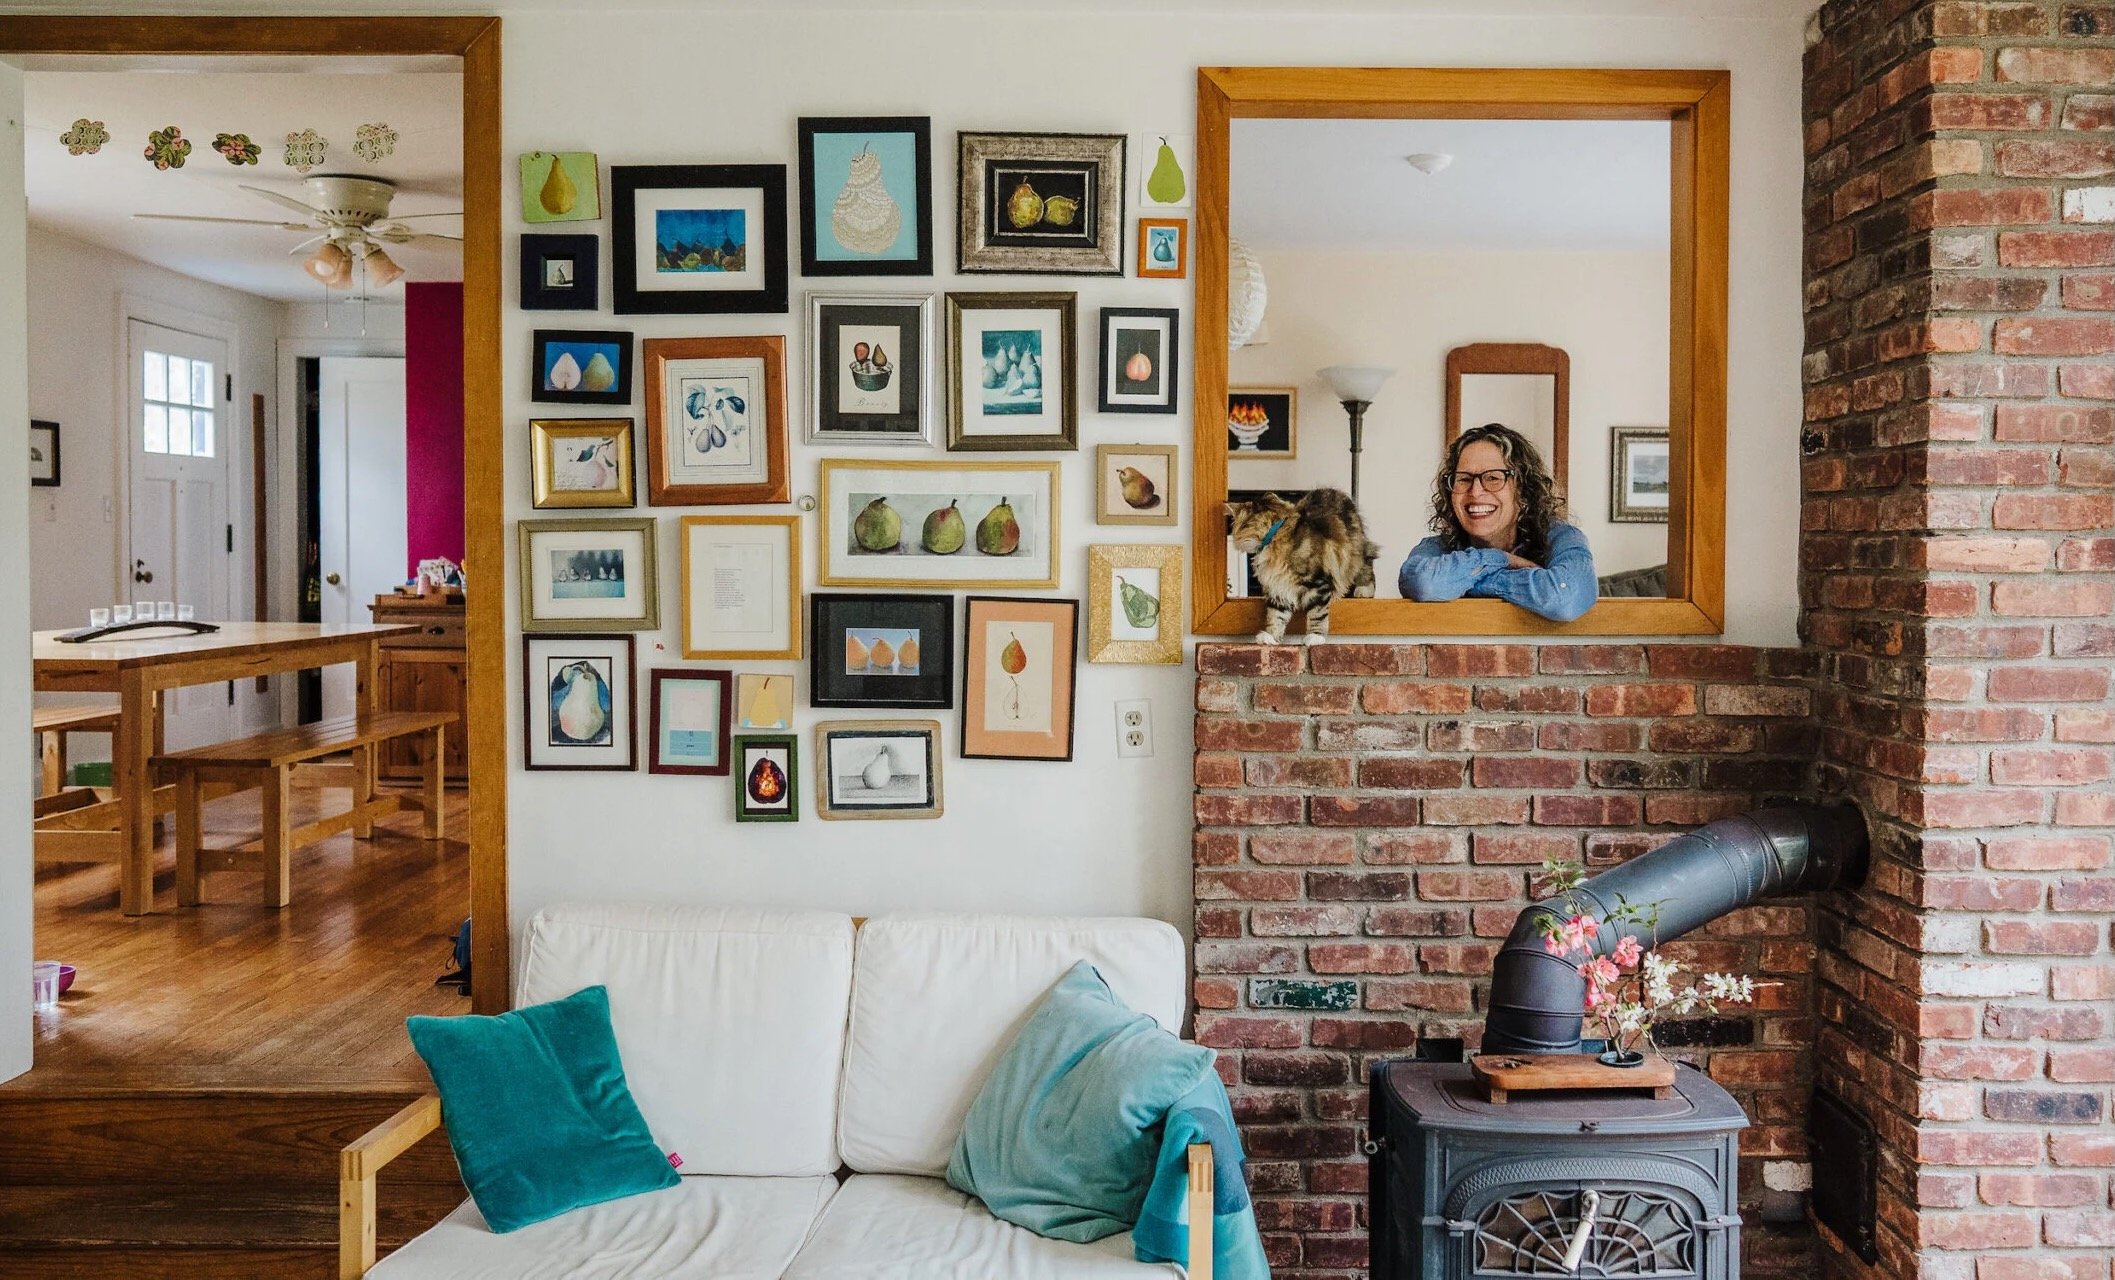 Catherine Newman's House Is a Joyful Jumble of Books, Games and Cats